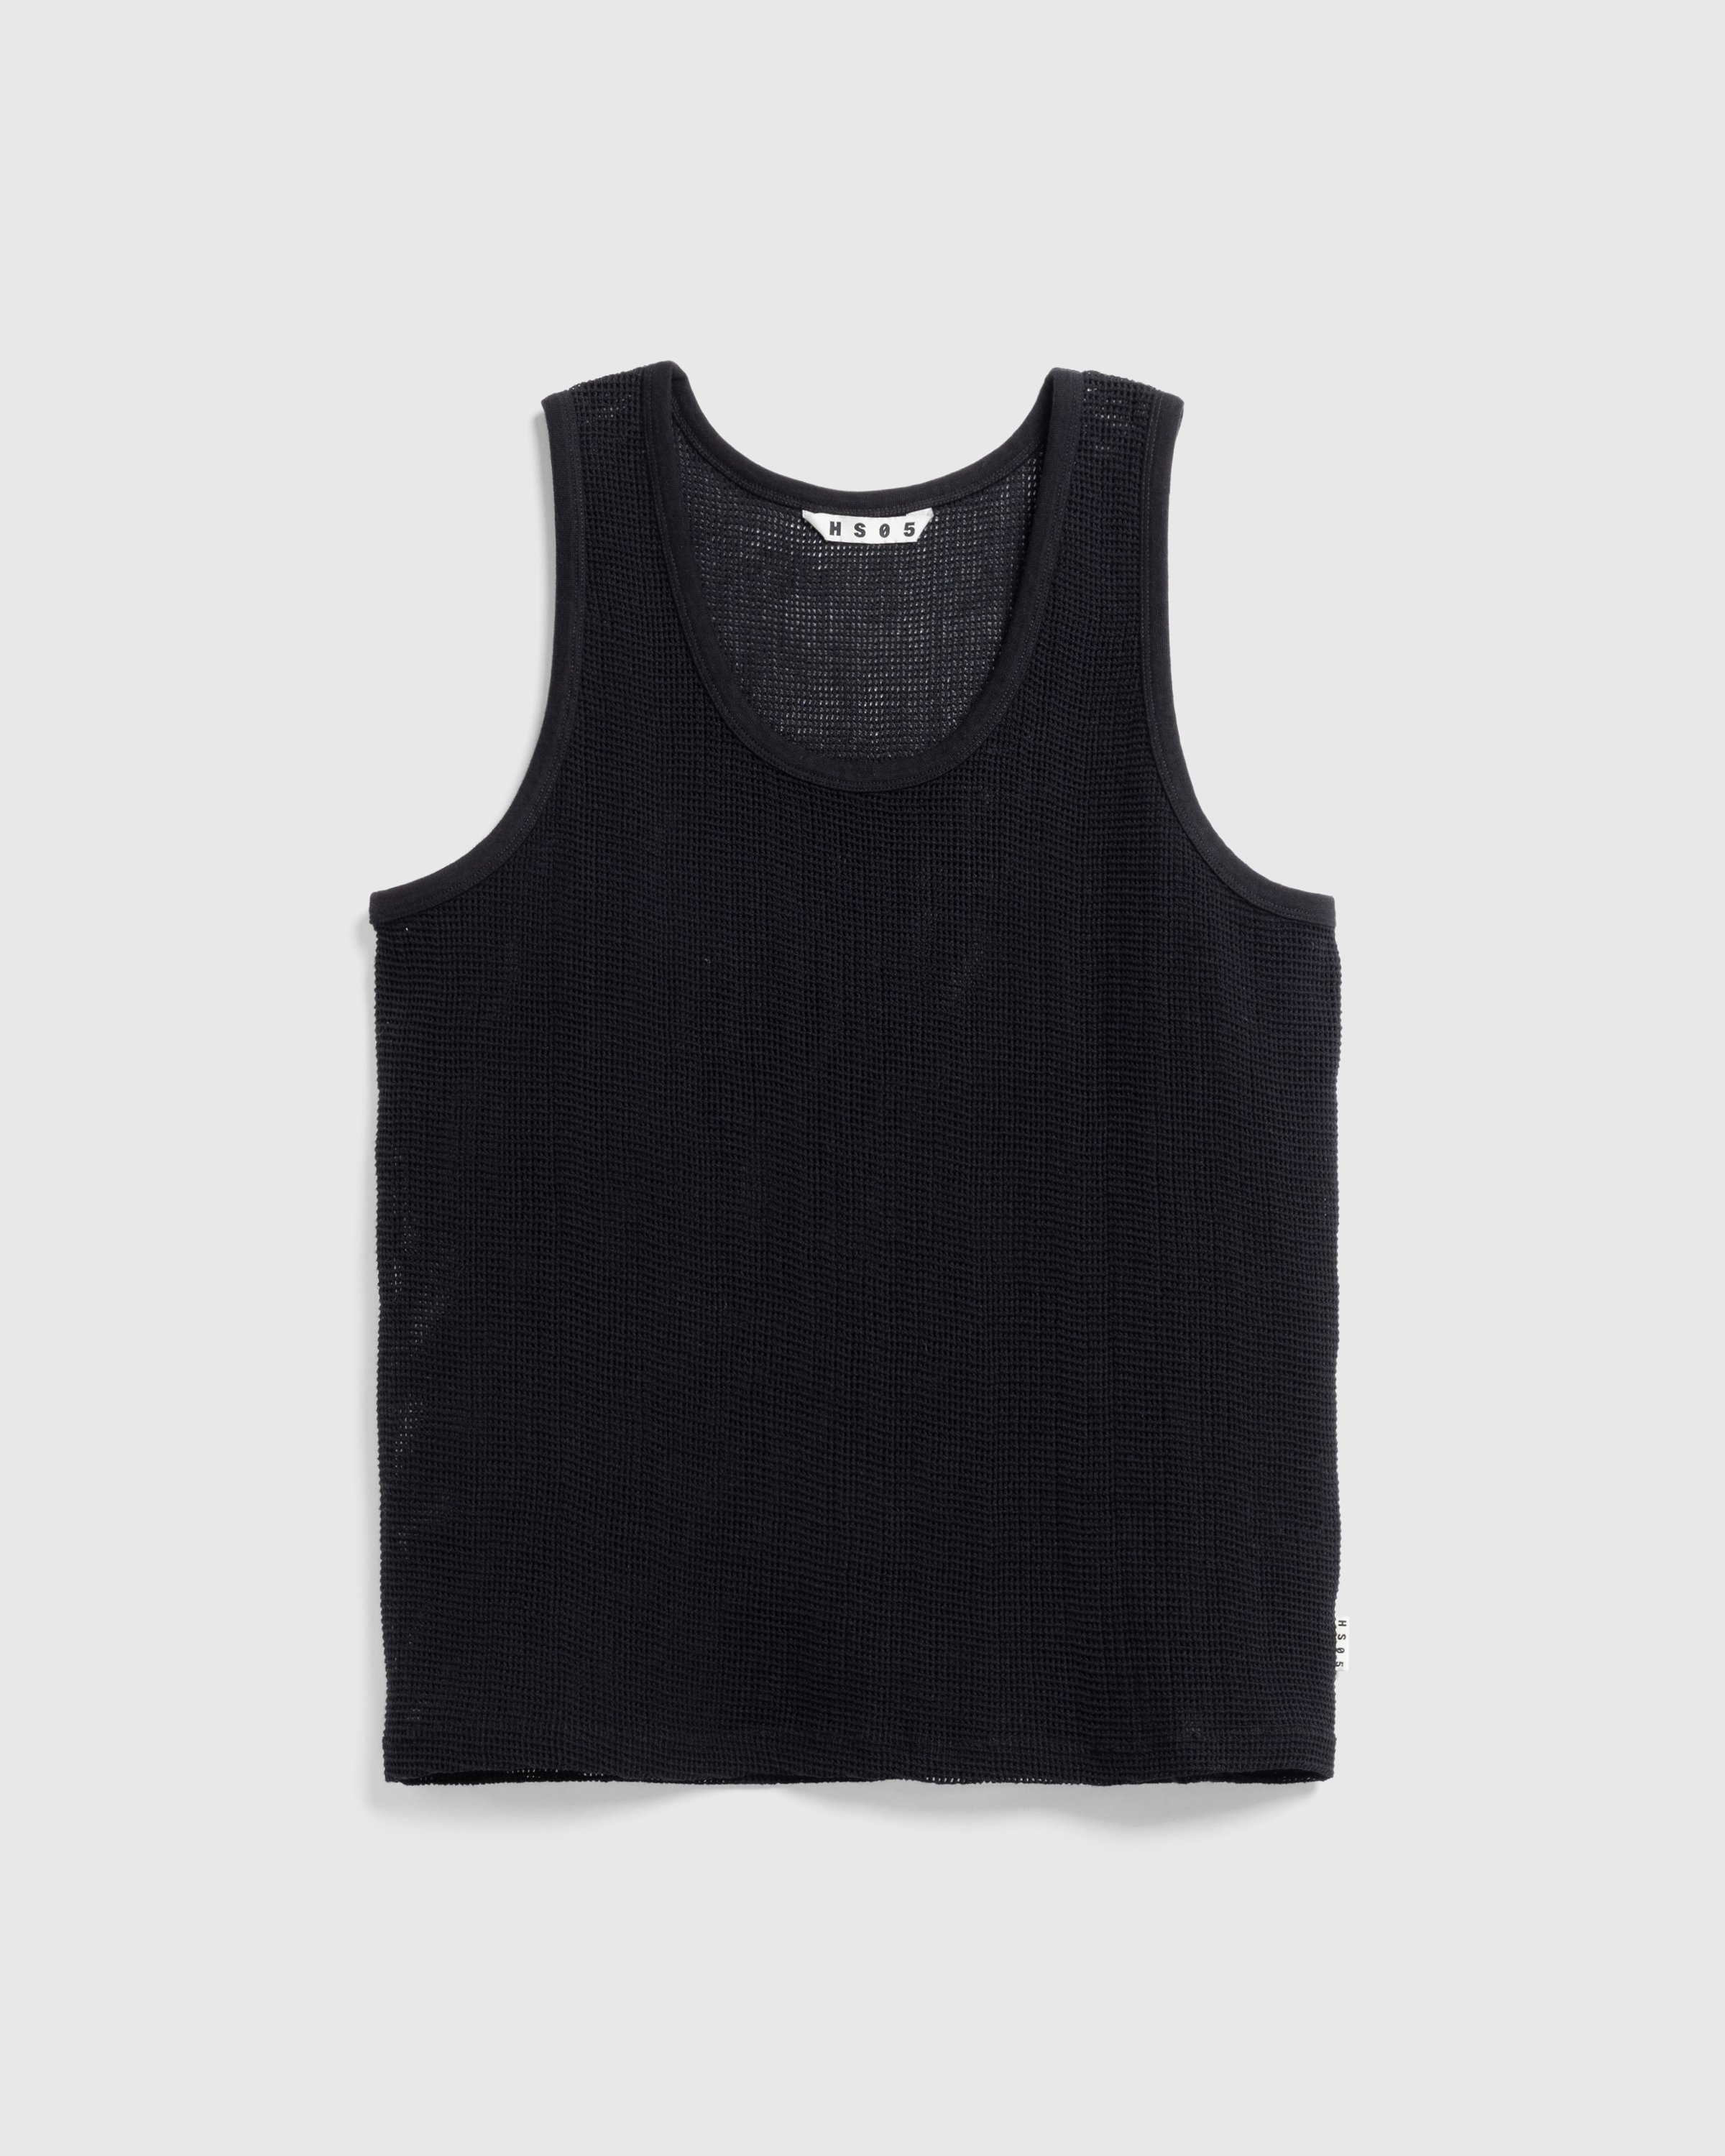 Highsnobiety HS05 - Pigment Dyed Cotton Mesh Tank Top Black - Clothing -  - Image 1